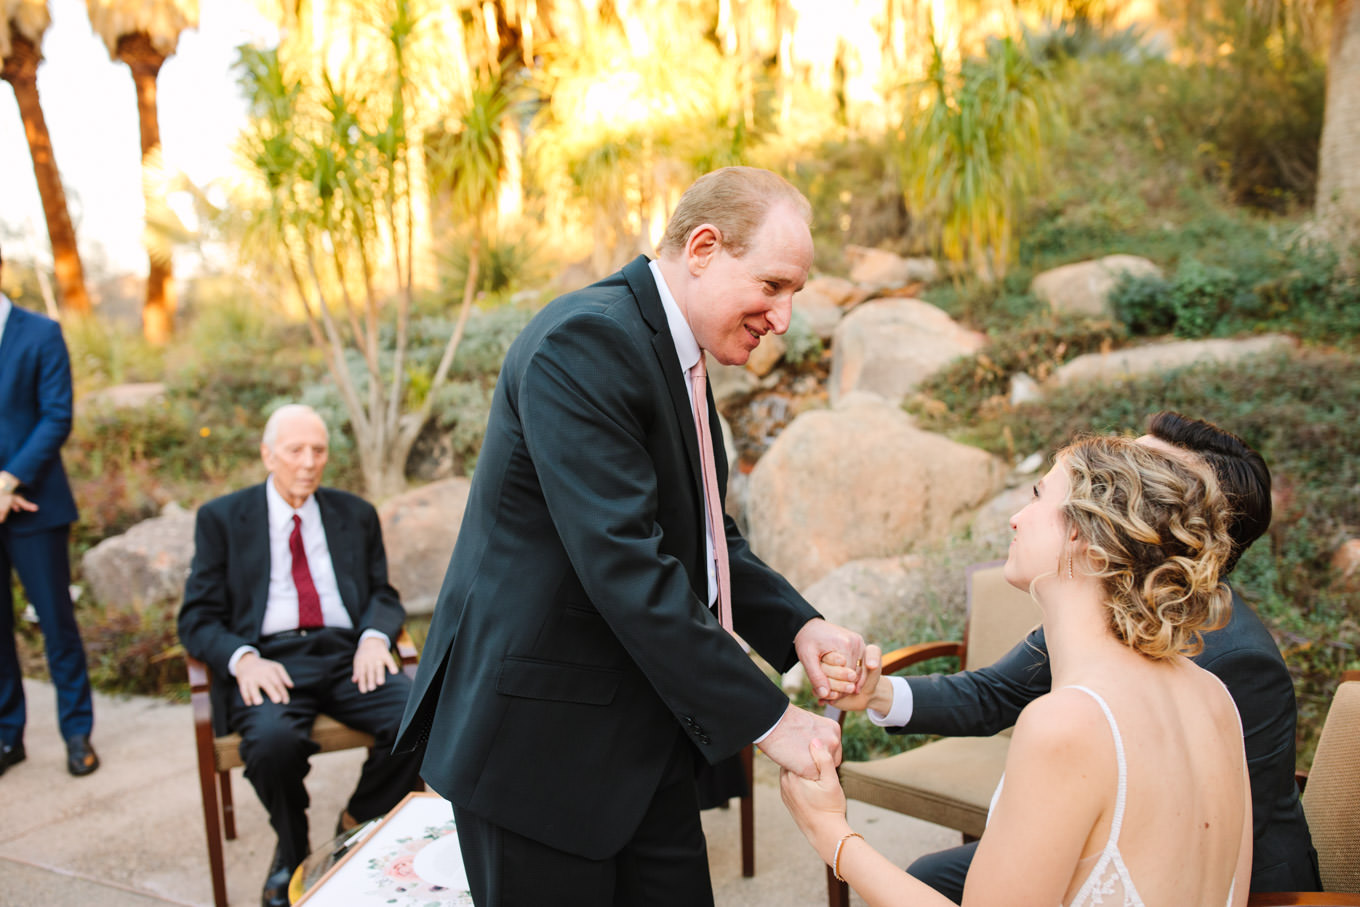 Ketubah signing | Living Desert Zoo & Gardens wedding with unique details | Elevated and colorful wedding photography for fun-loving couples in Southern California |  #PalmSprings #palmspringsphotographer #gardenwedding #palmspringswedding  Source: Mary Costa Photography | Los Angeles wedding photographer 